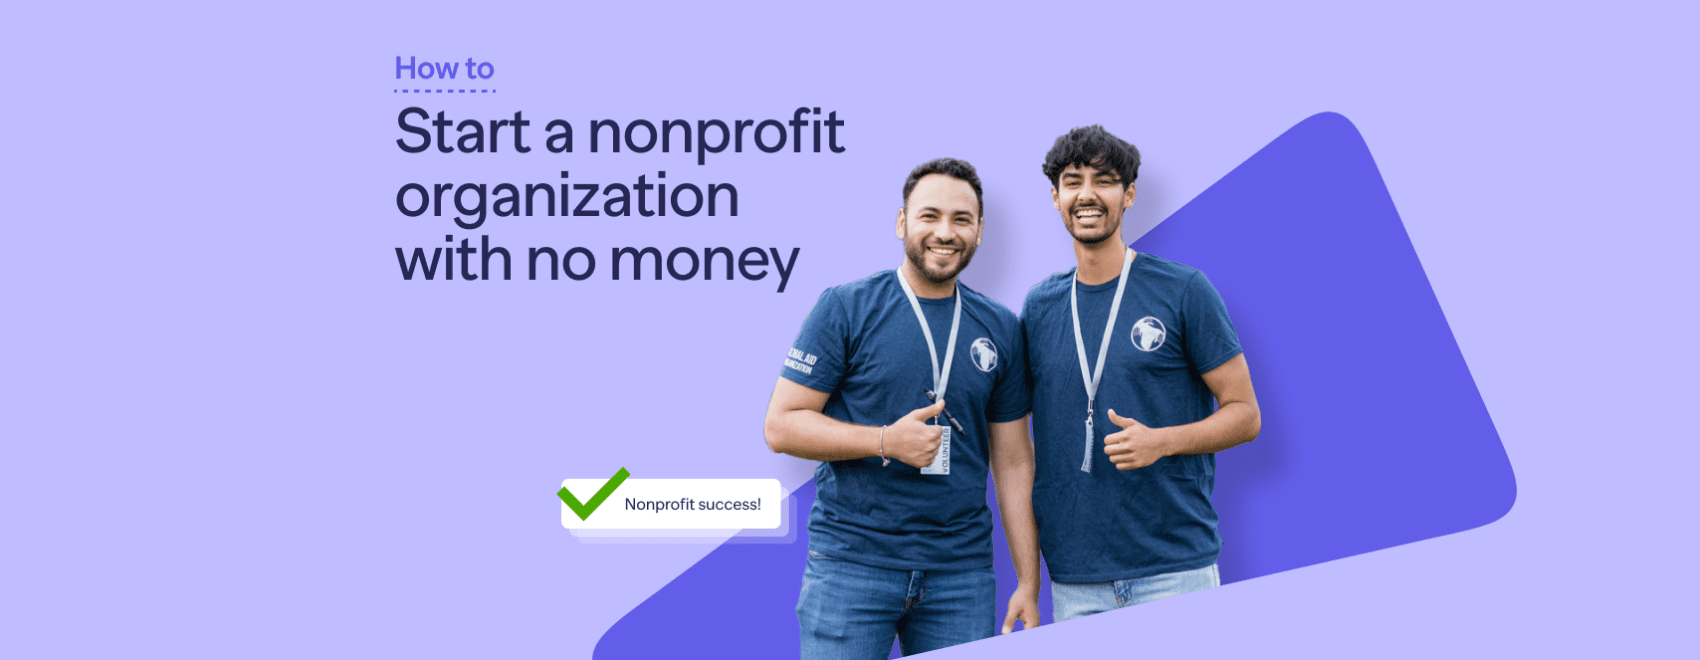 How to start a nonprofit organization with no money